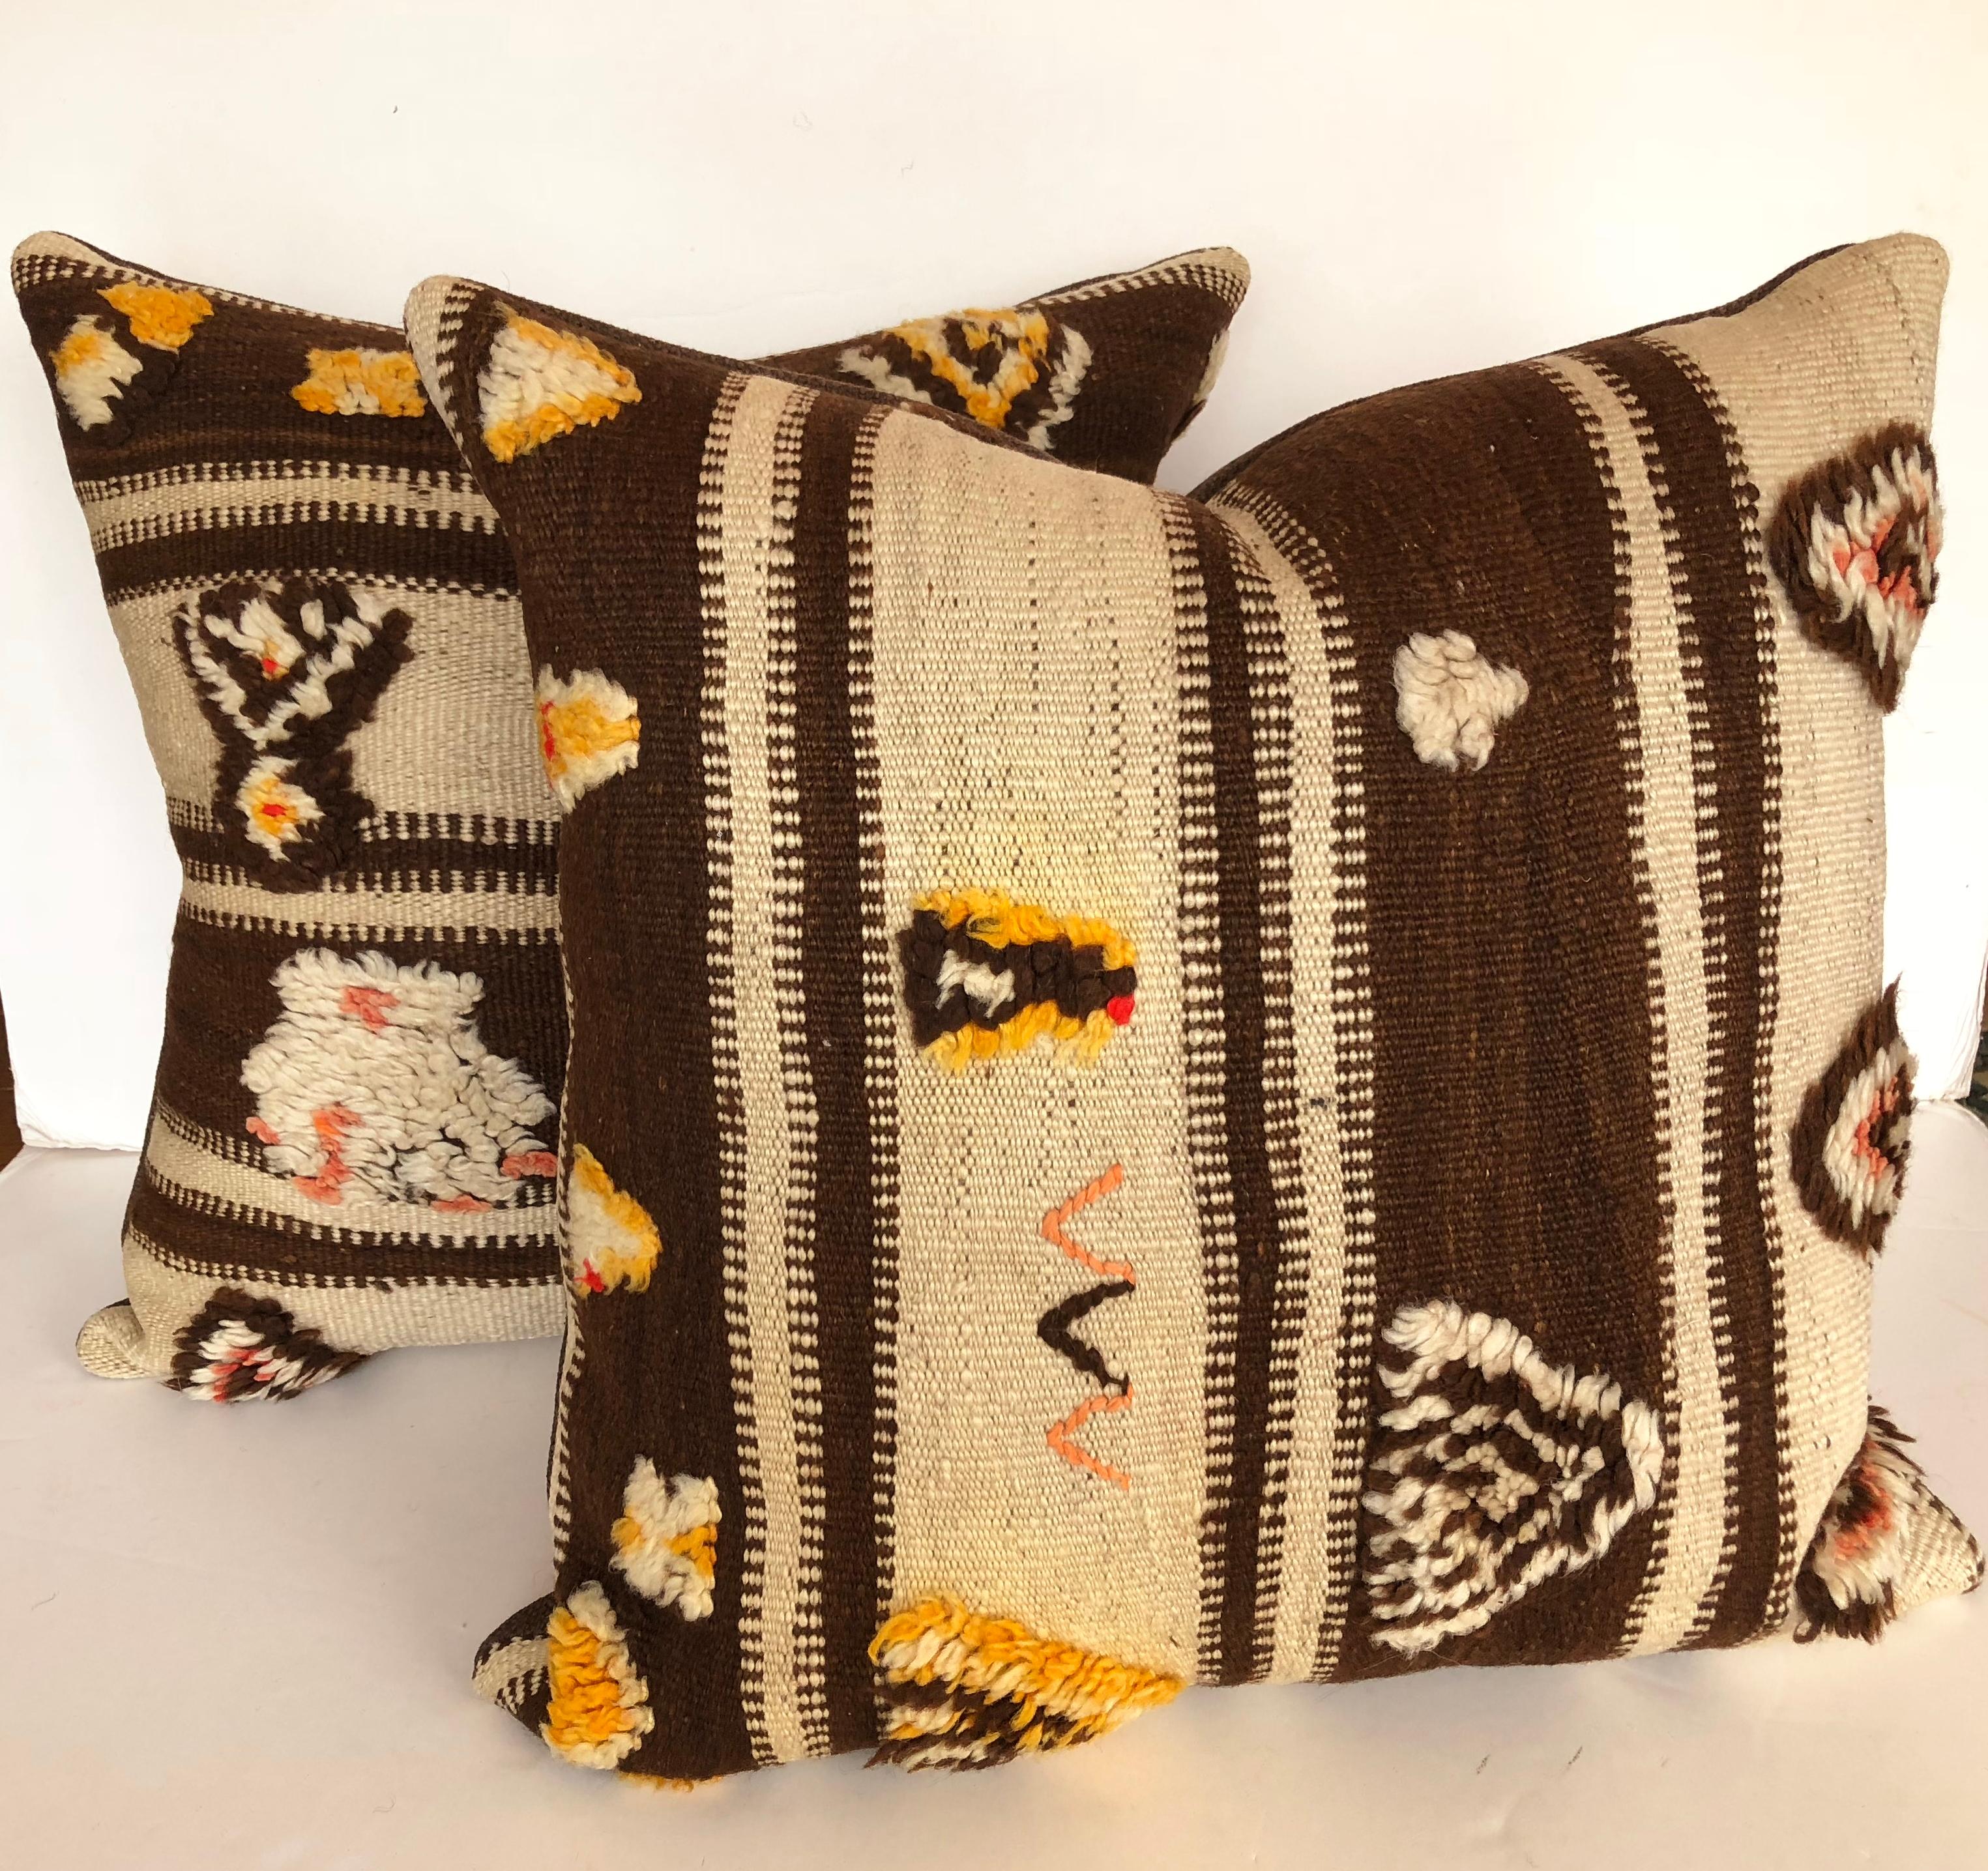 Hand-Woven Custom Pillow by Maison Suzanne,  Cut from a Vintage Wool Moroccan Berber Rug